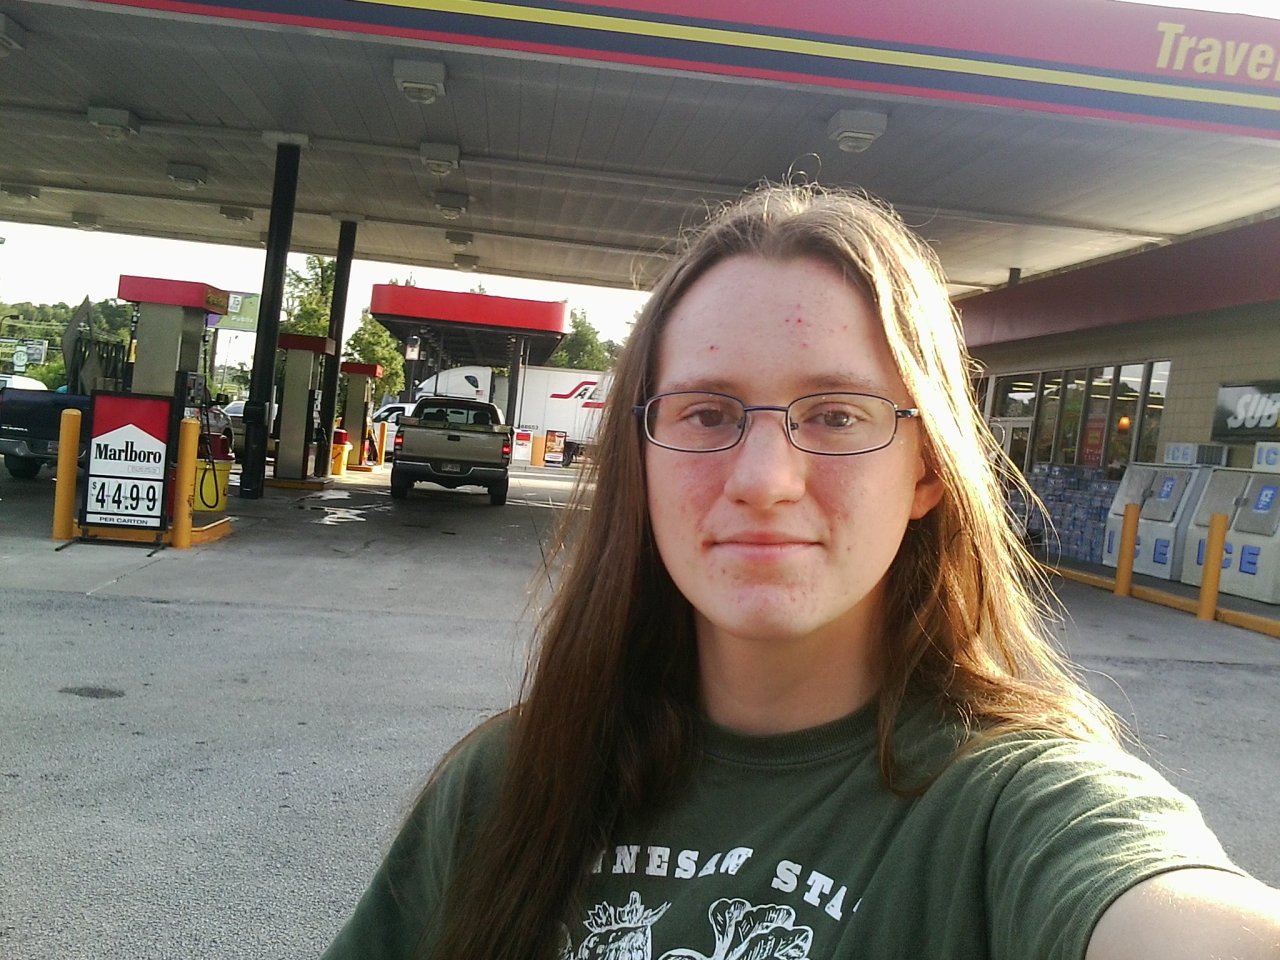 Savannah trip photos and glasses selfie at a gas station. a sunrise on the drive